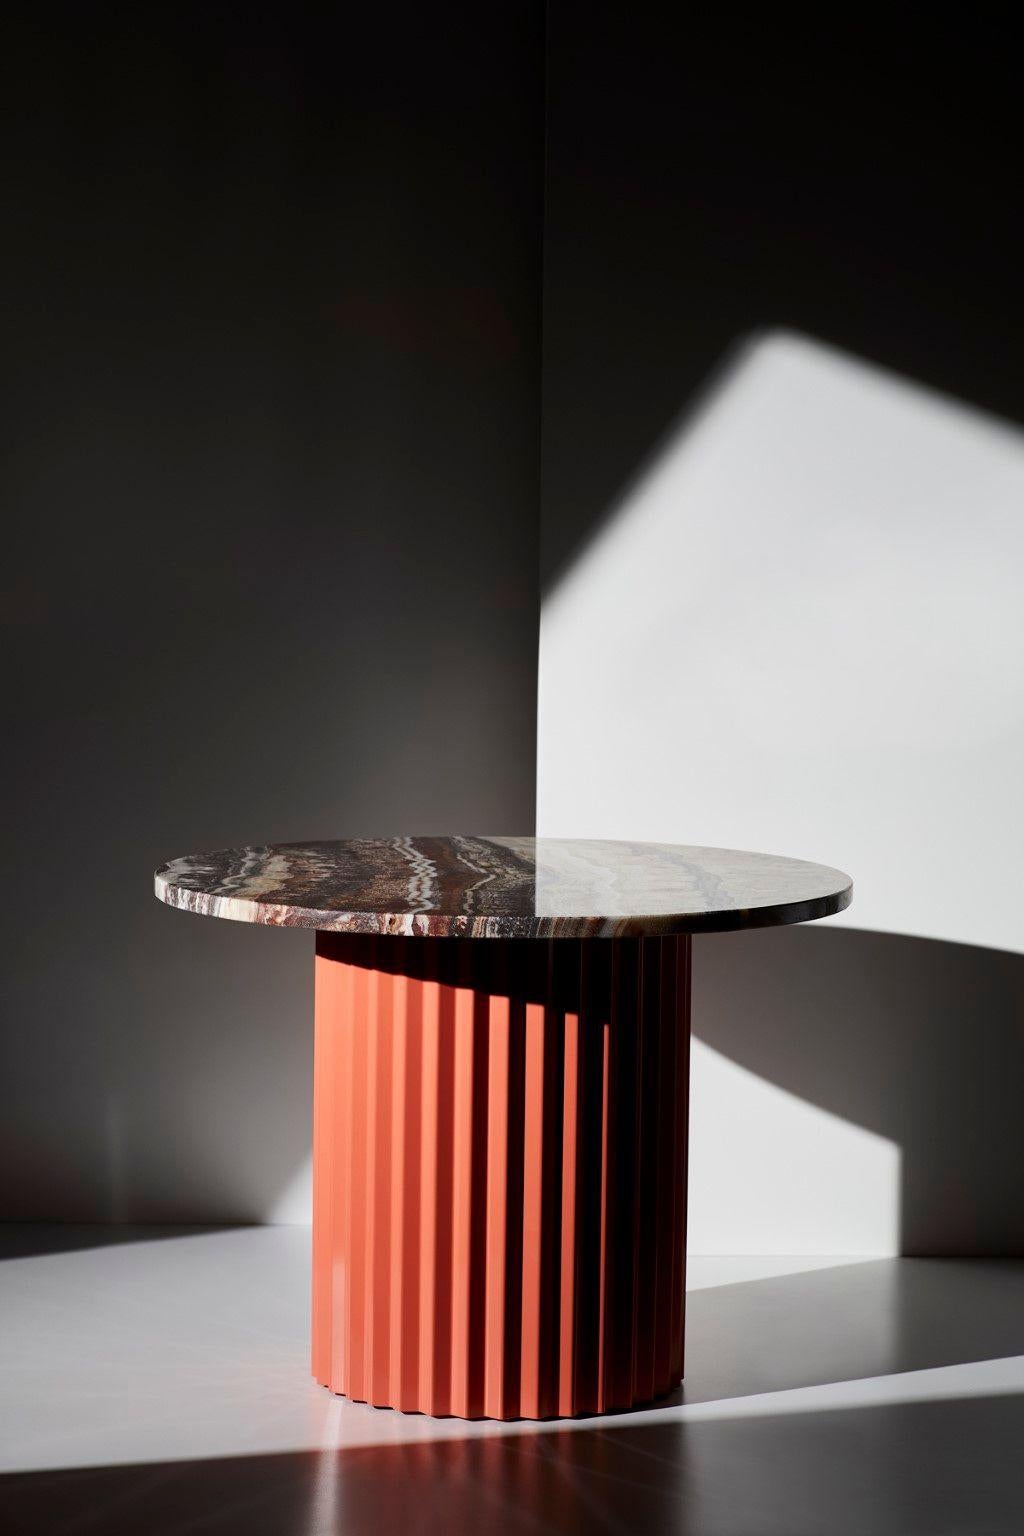 Onyx table 60 by Lisette Rützou
Dimensions: D 60 x H 41 cm
Materials: Brass column with Marble tabletop
Also available Ø 40

 Lisette Rützou’s design is motivated by an urge to articulate a story. Inspired by the beauty of materials, form and